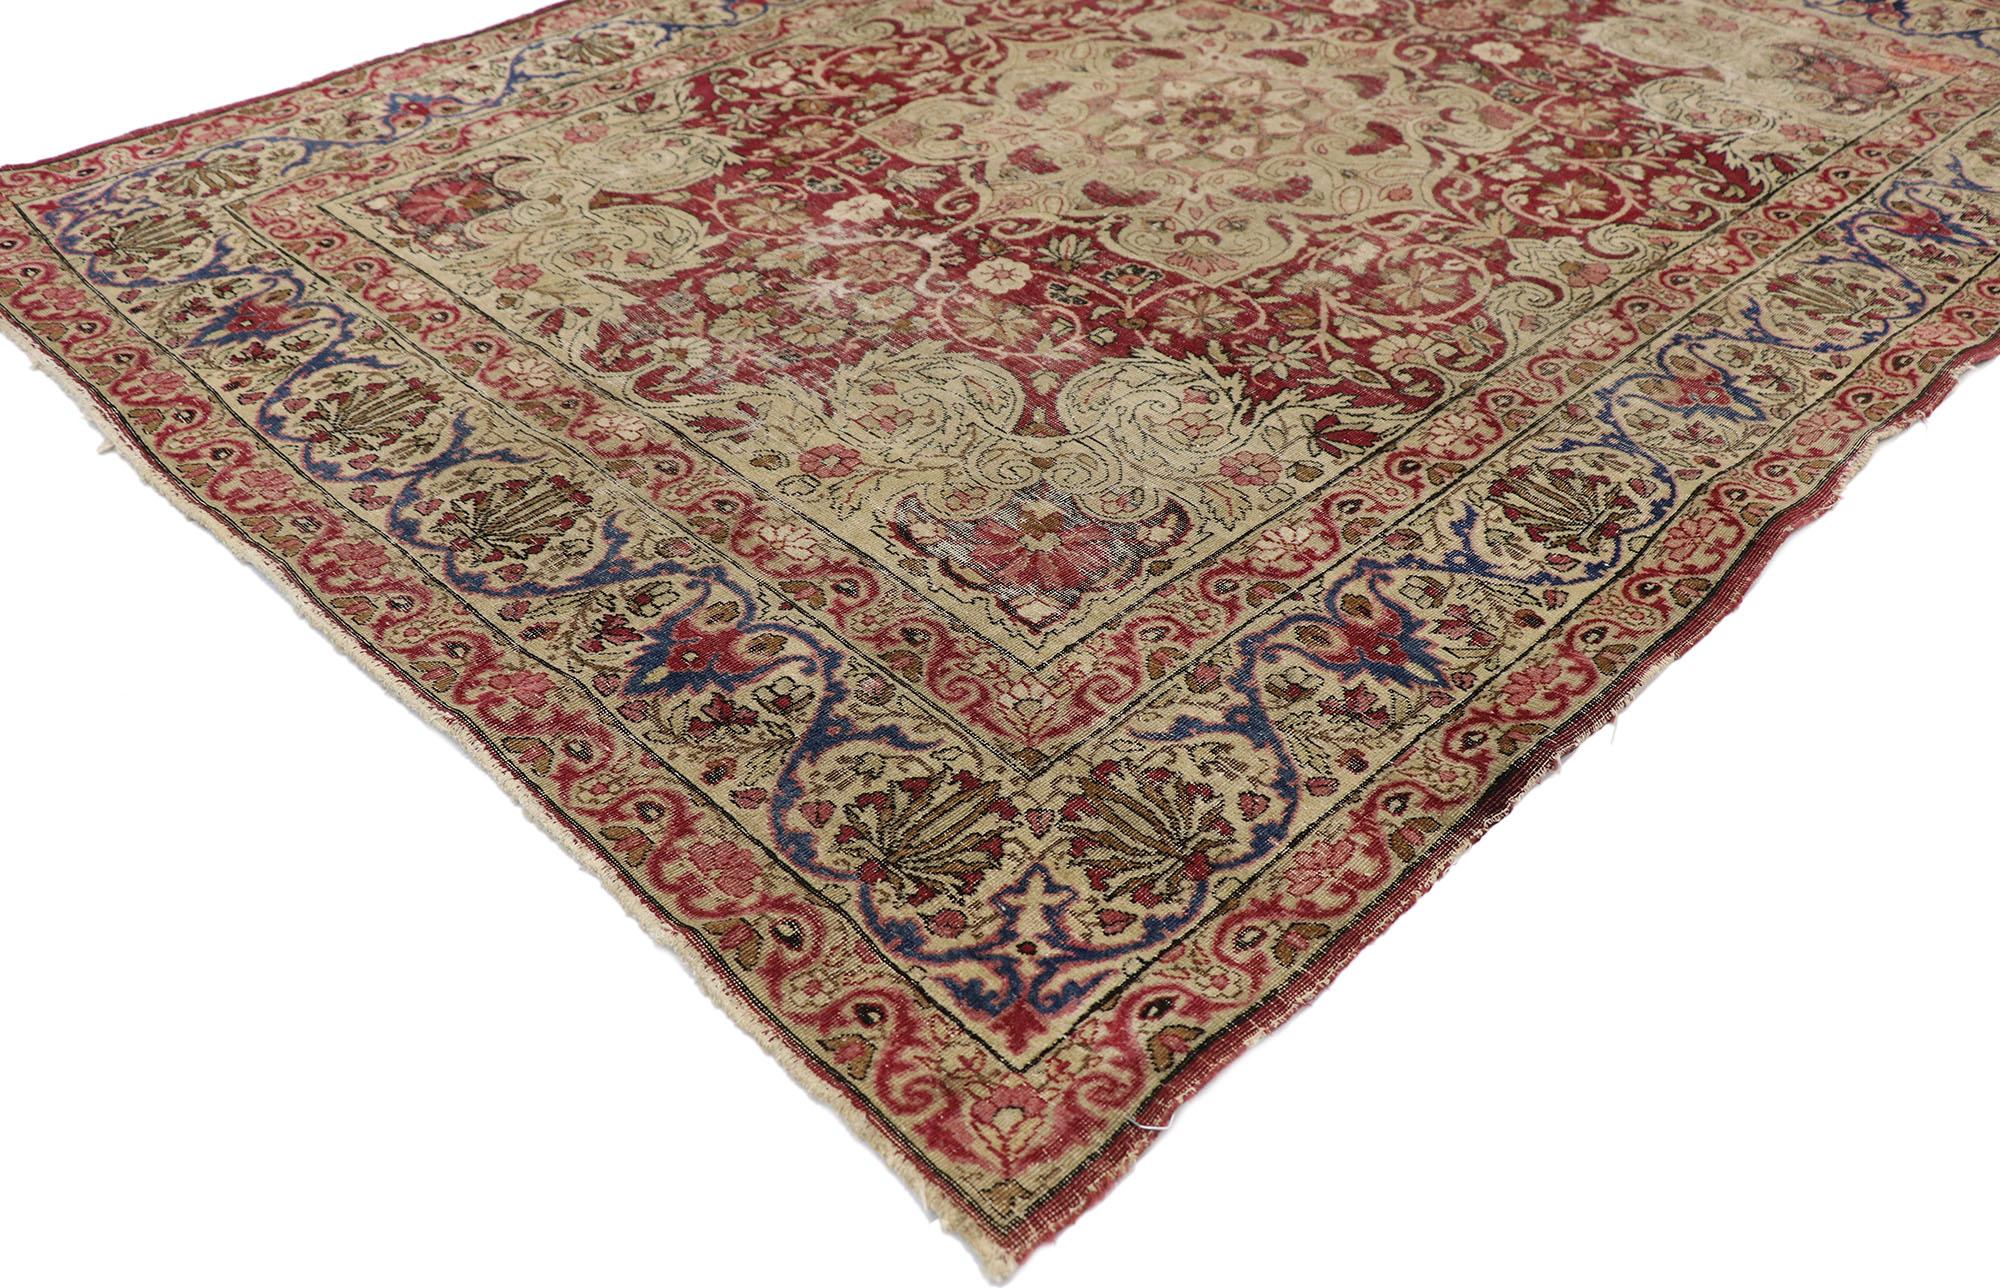 77608, distressed antique Persian Kerman rug with rustic old World Victorian style. Displaying a lovingly time-worn composition and a hint of romantic connotations with rustic sensibility, this hand knotted wool distressed antique Persian Kerman rug